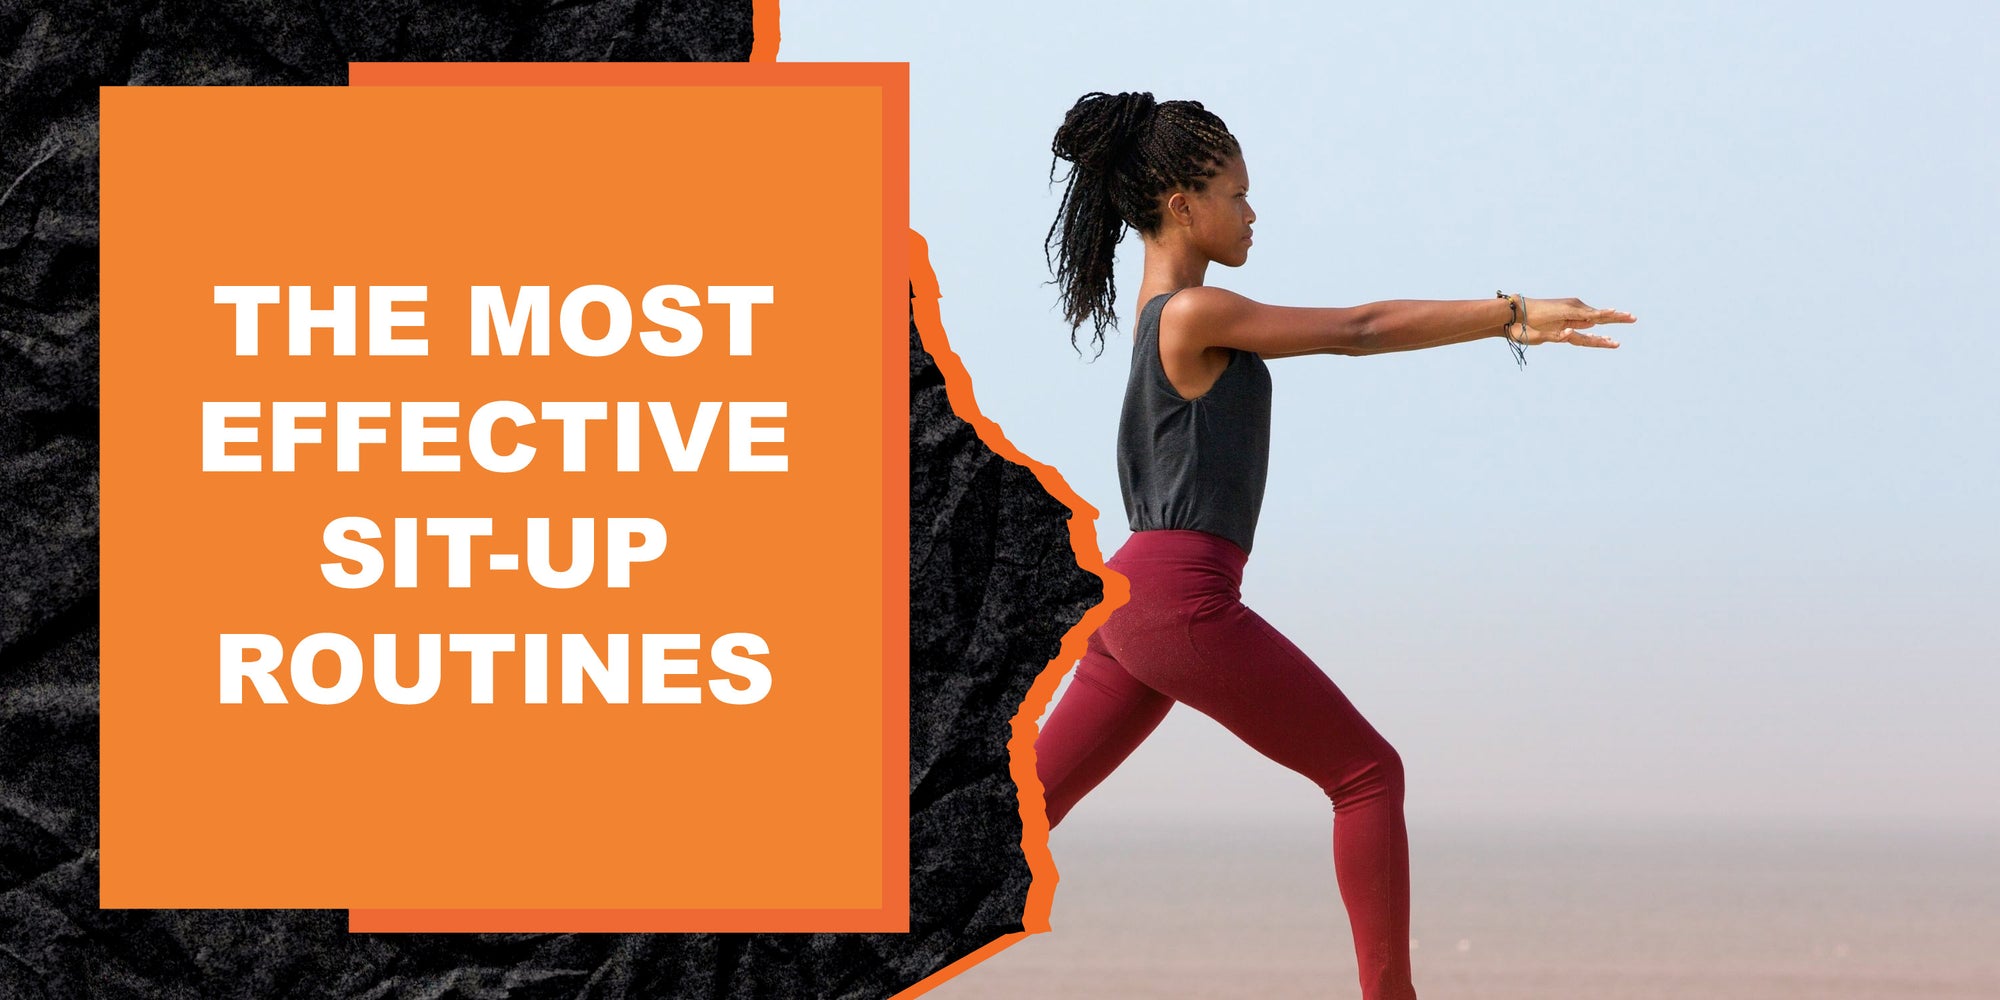 The Most Effective Sit-Up Routines